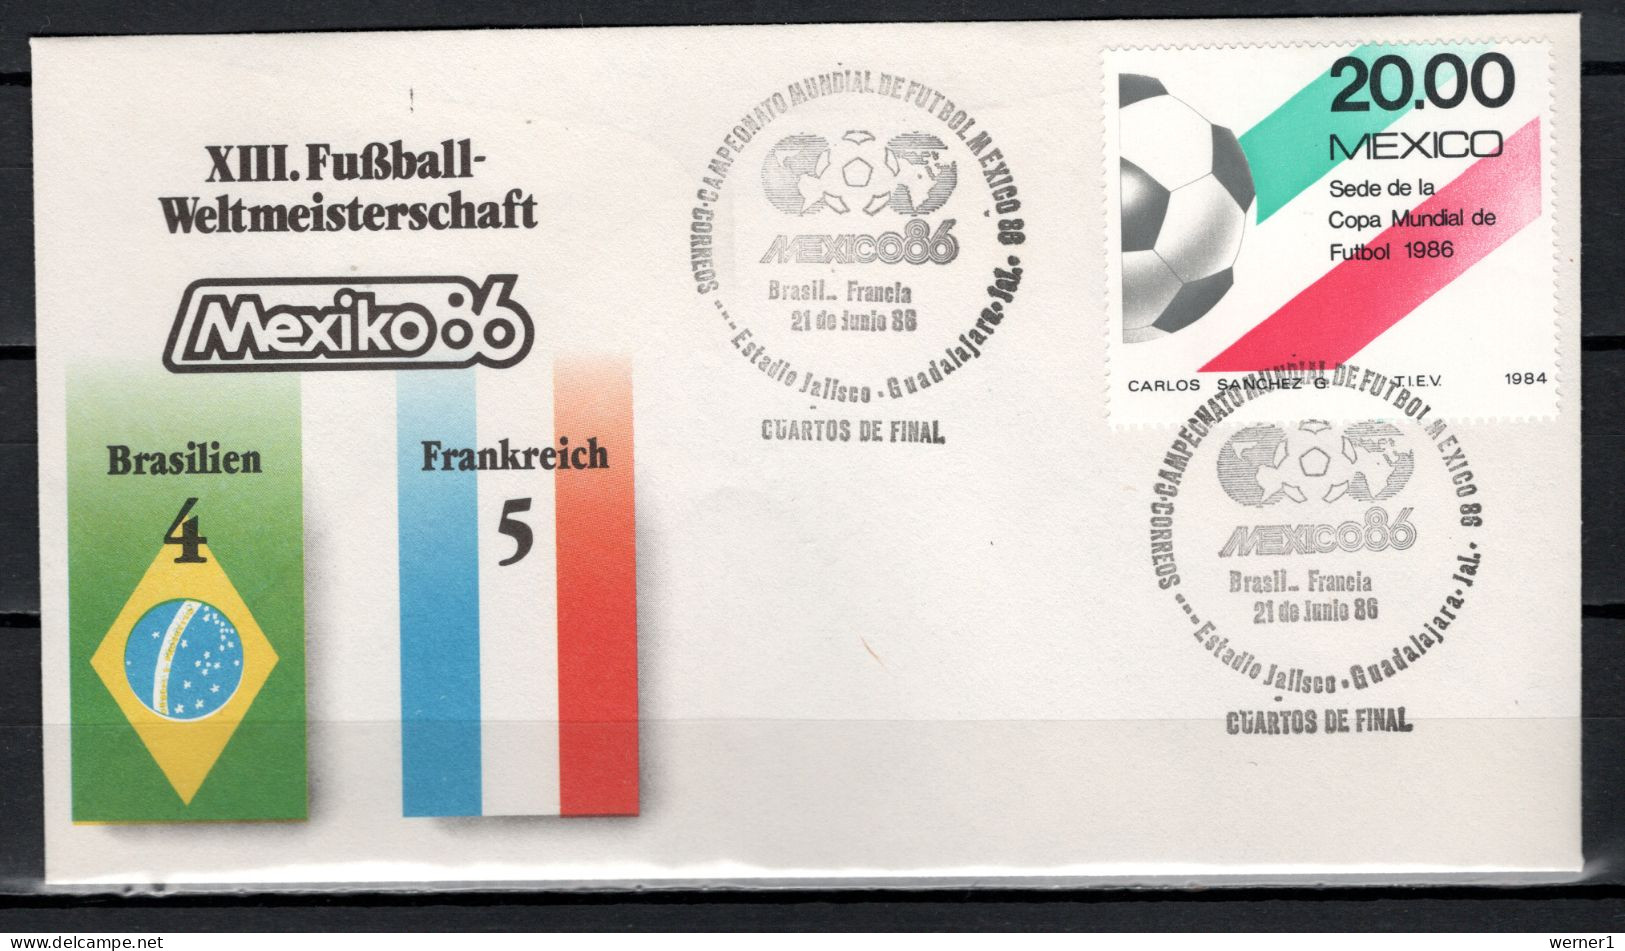 Mexico 1986 Football Soccer World Cup Commemorative Cover Match Brazil - France 4 : 5 - 1986 – Mexico